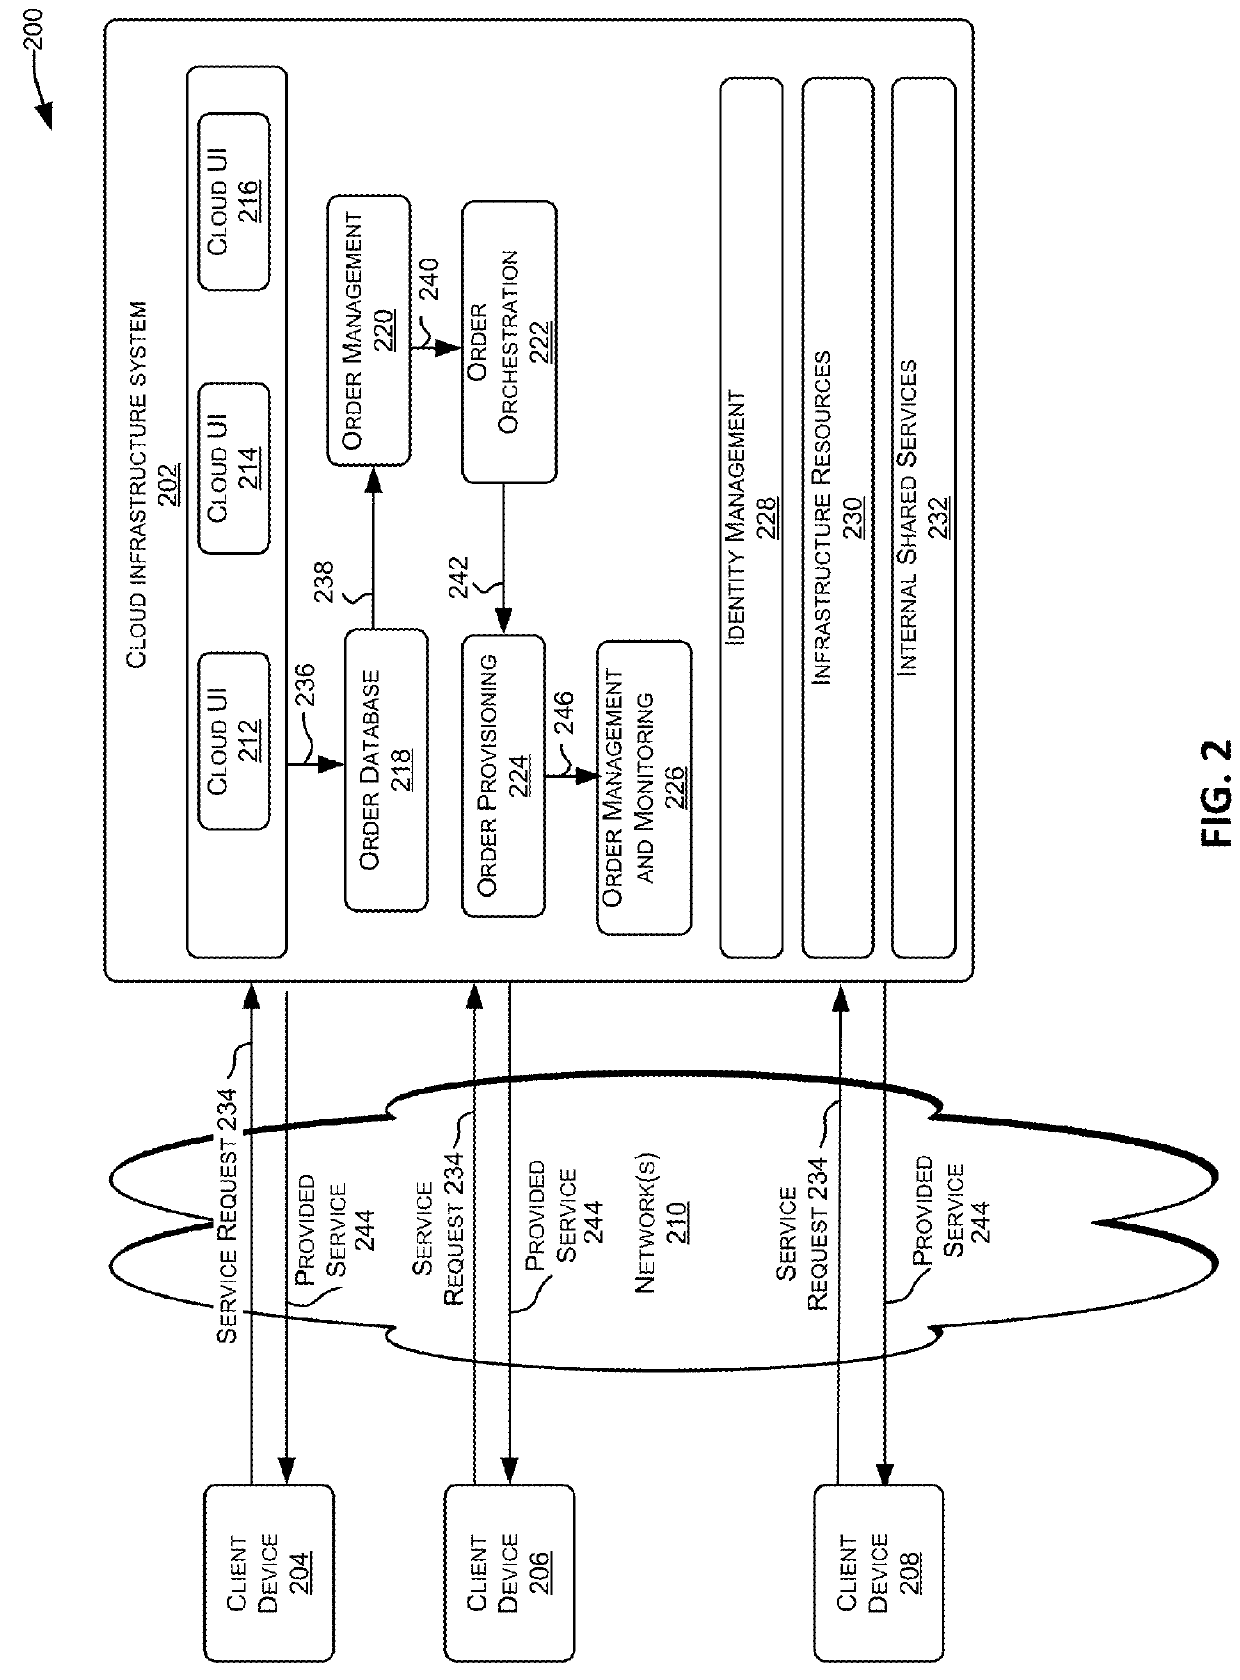 Systems and methods for generating natural language insights about sets of data